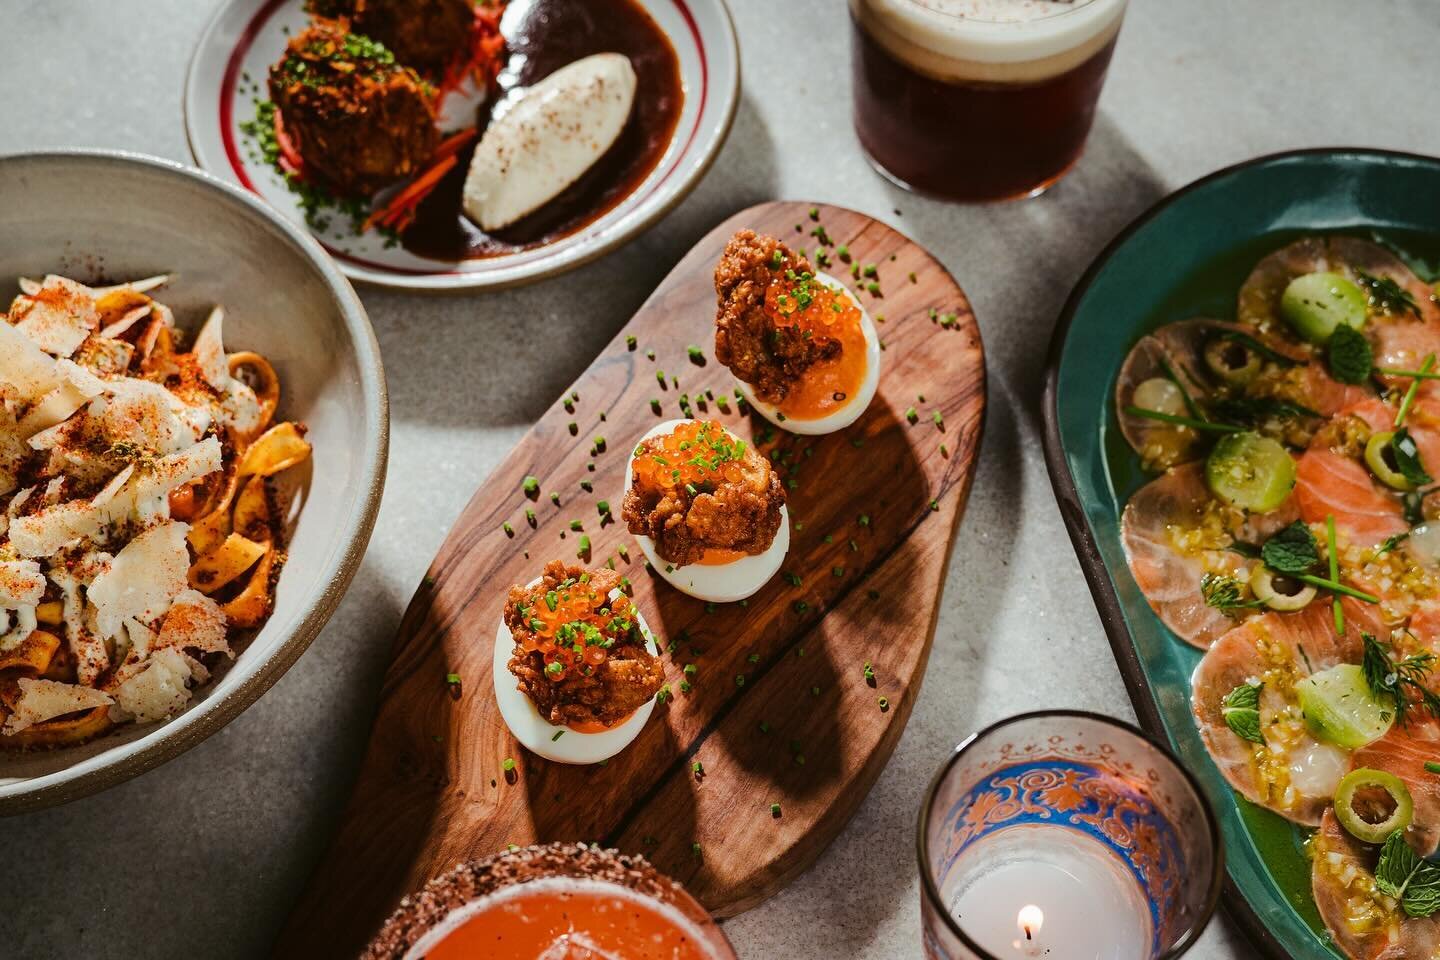 NEW CLIENT ALERT: Residents Caf&eacute; and Bar

This MICHELIN Bib-Gourmand gem, founded by David Nammour &amp; Farid Azouri, delivers exquisite flavors with a global influence in DC&rsquo;s Dupont neighborhood. Join Residents for brunch, dinner, &am